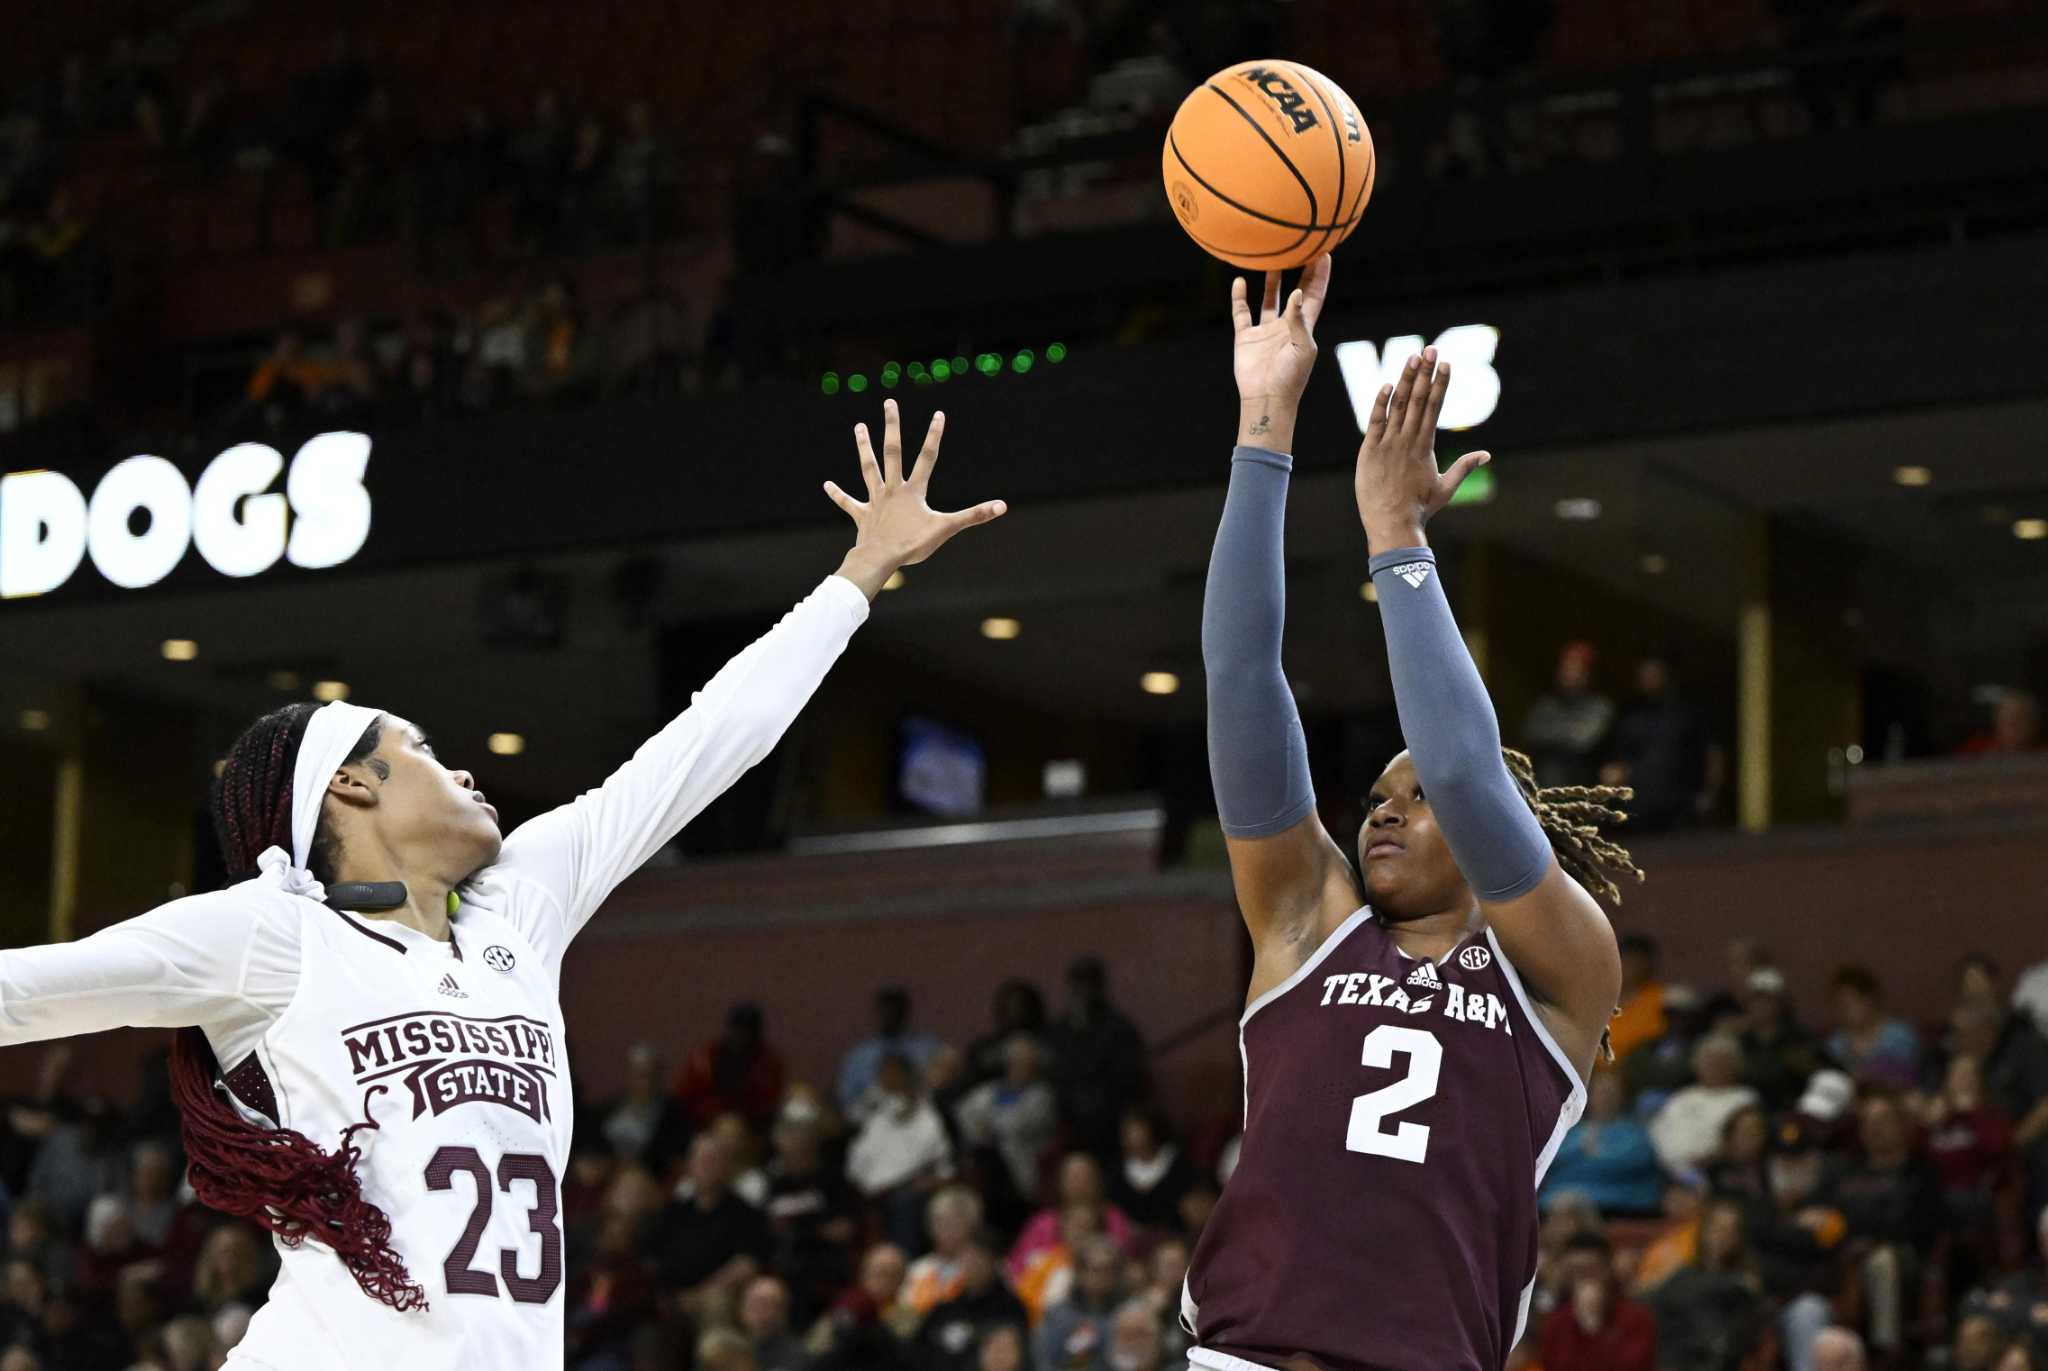 Mississippi State women's basketball coach Sam Purcell adds player